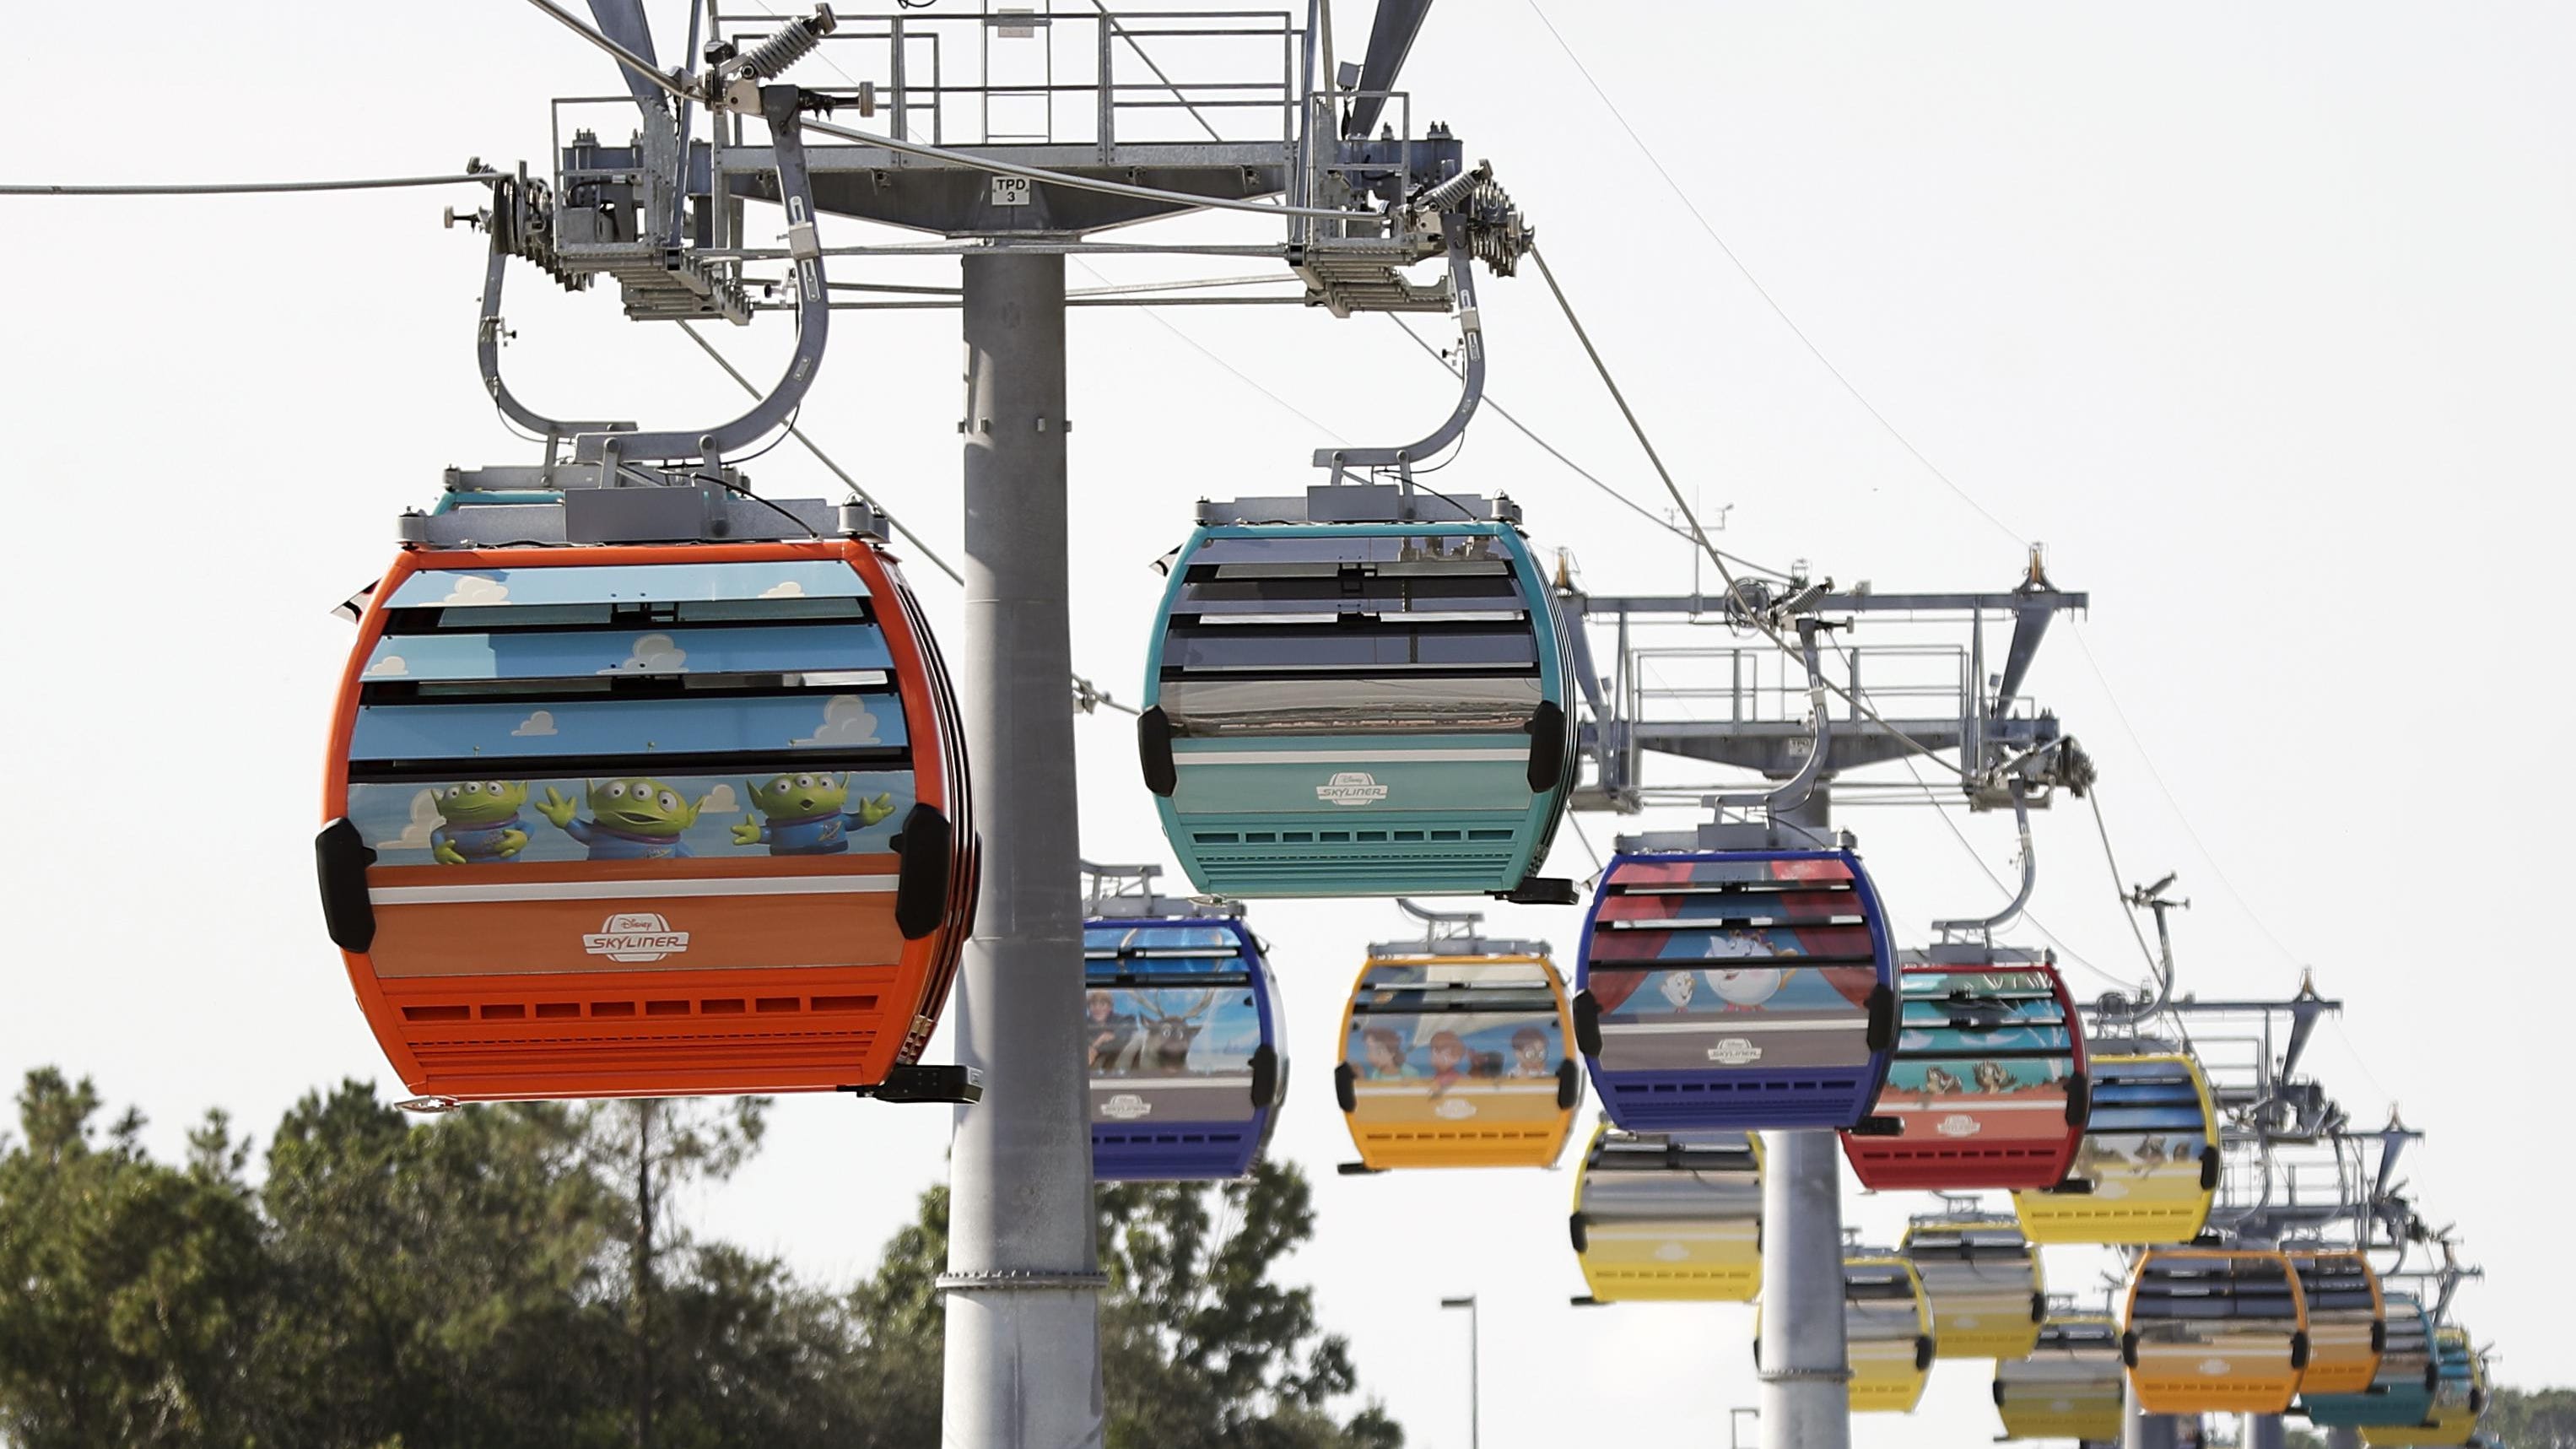 Disney World Skyliner accident When will it reopen?